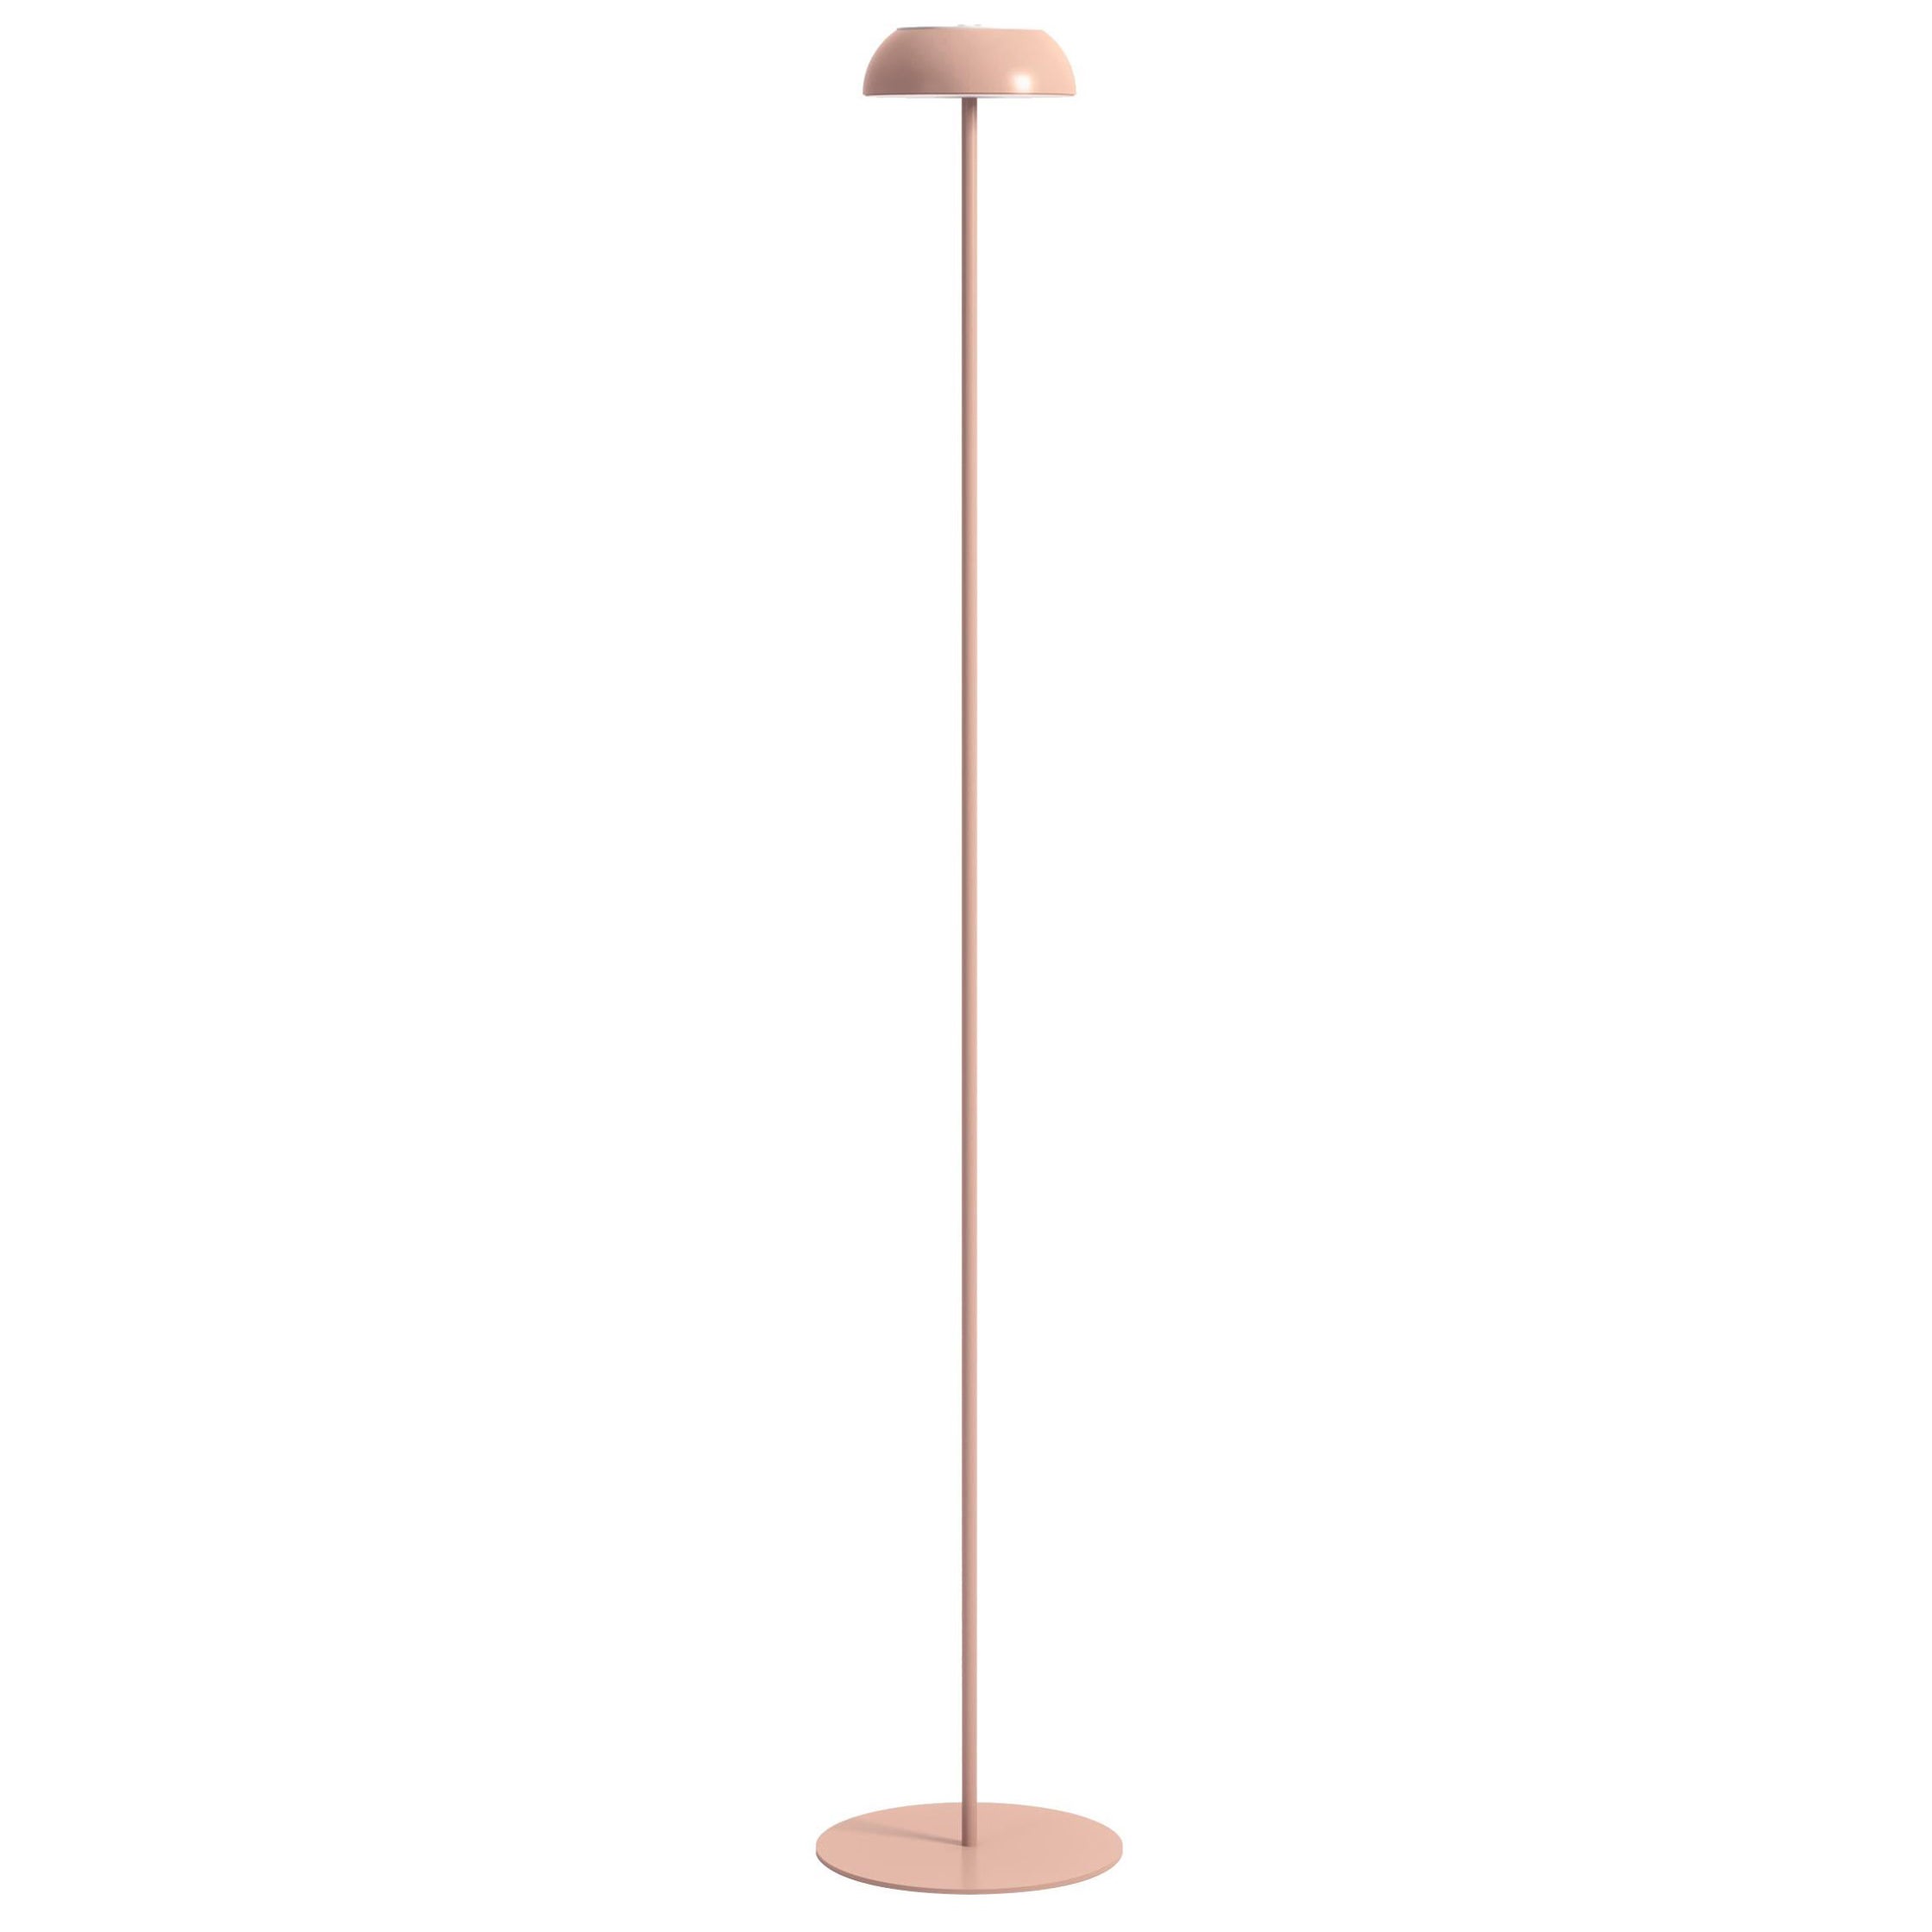 Axolight Float Floor Lamp in Mauve Dust Aluminum and Steel by Mario Alessiani For Sale